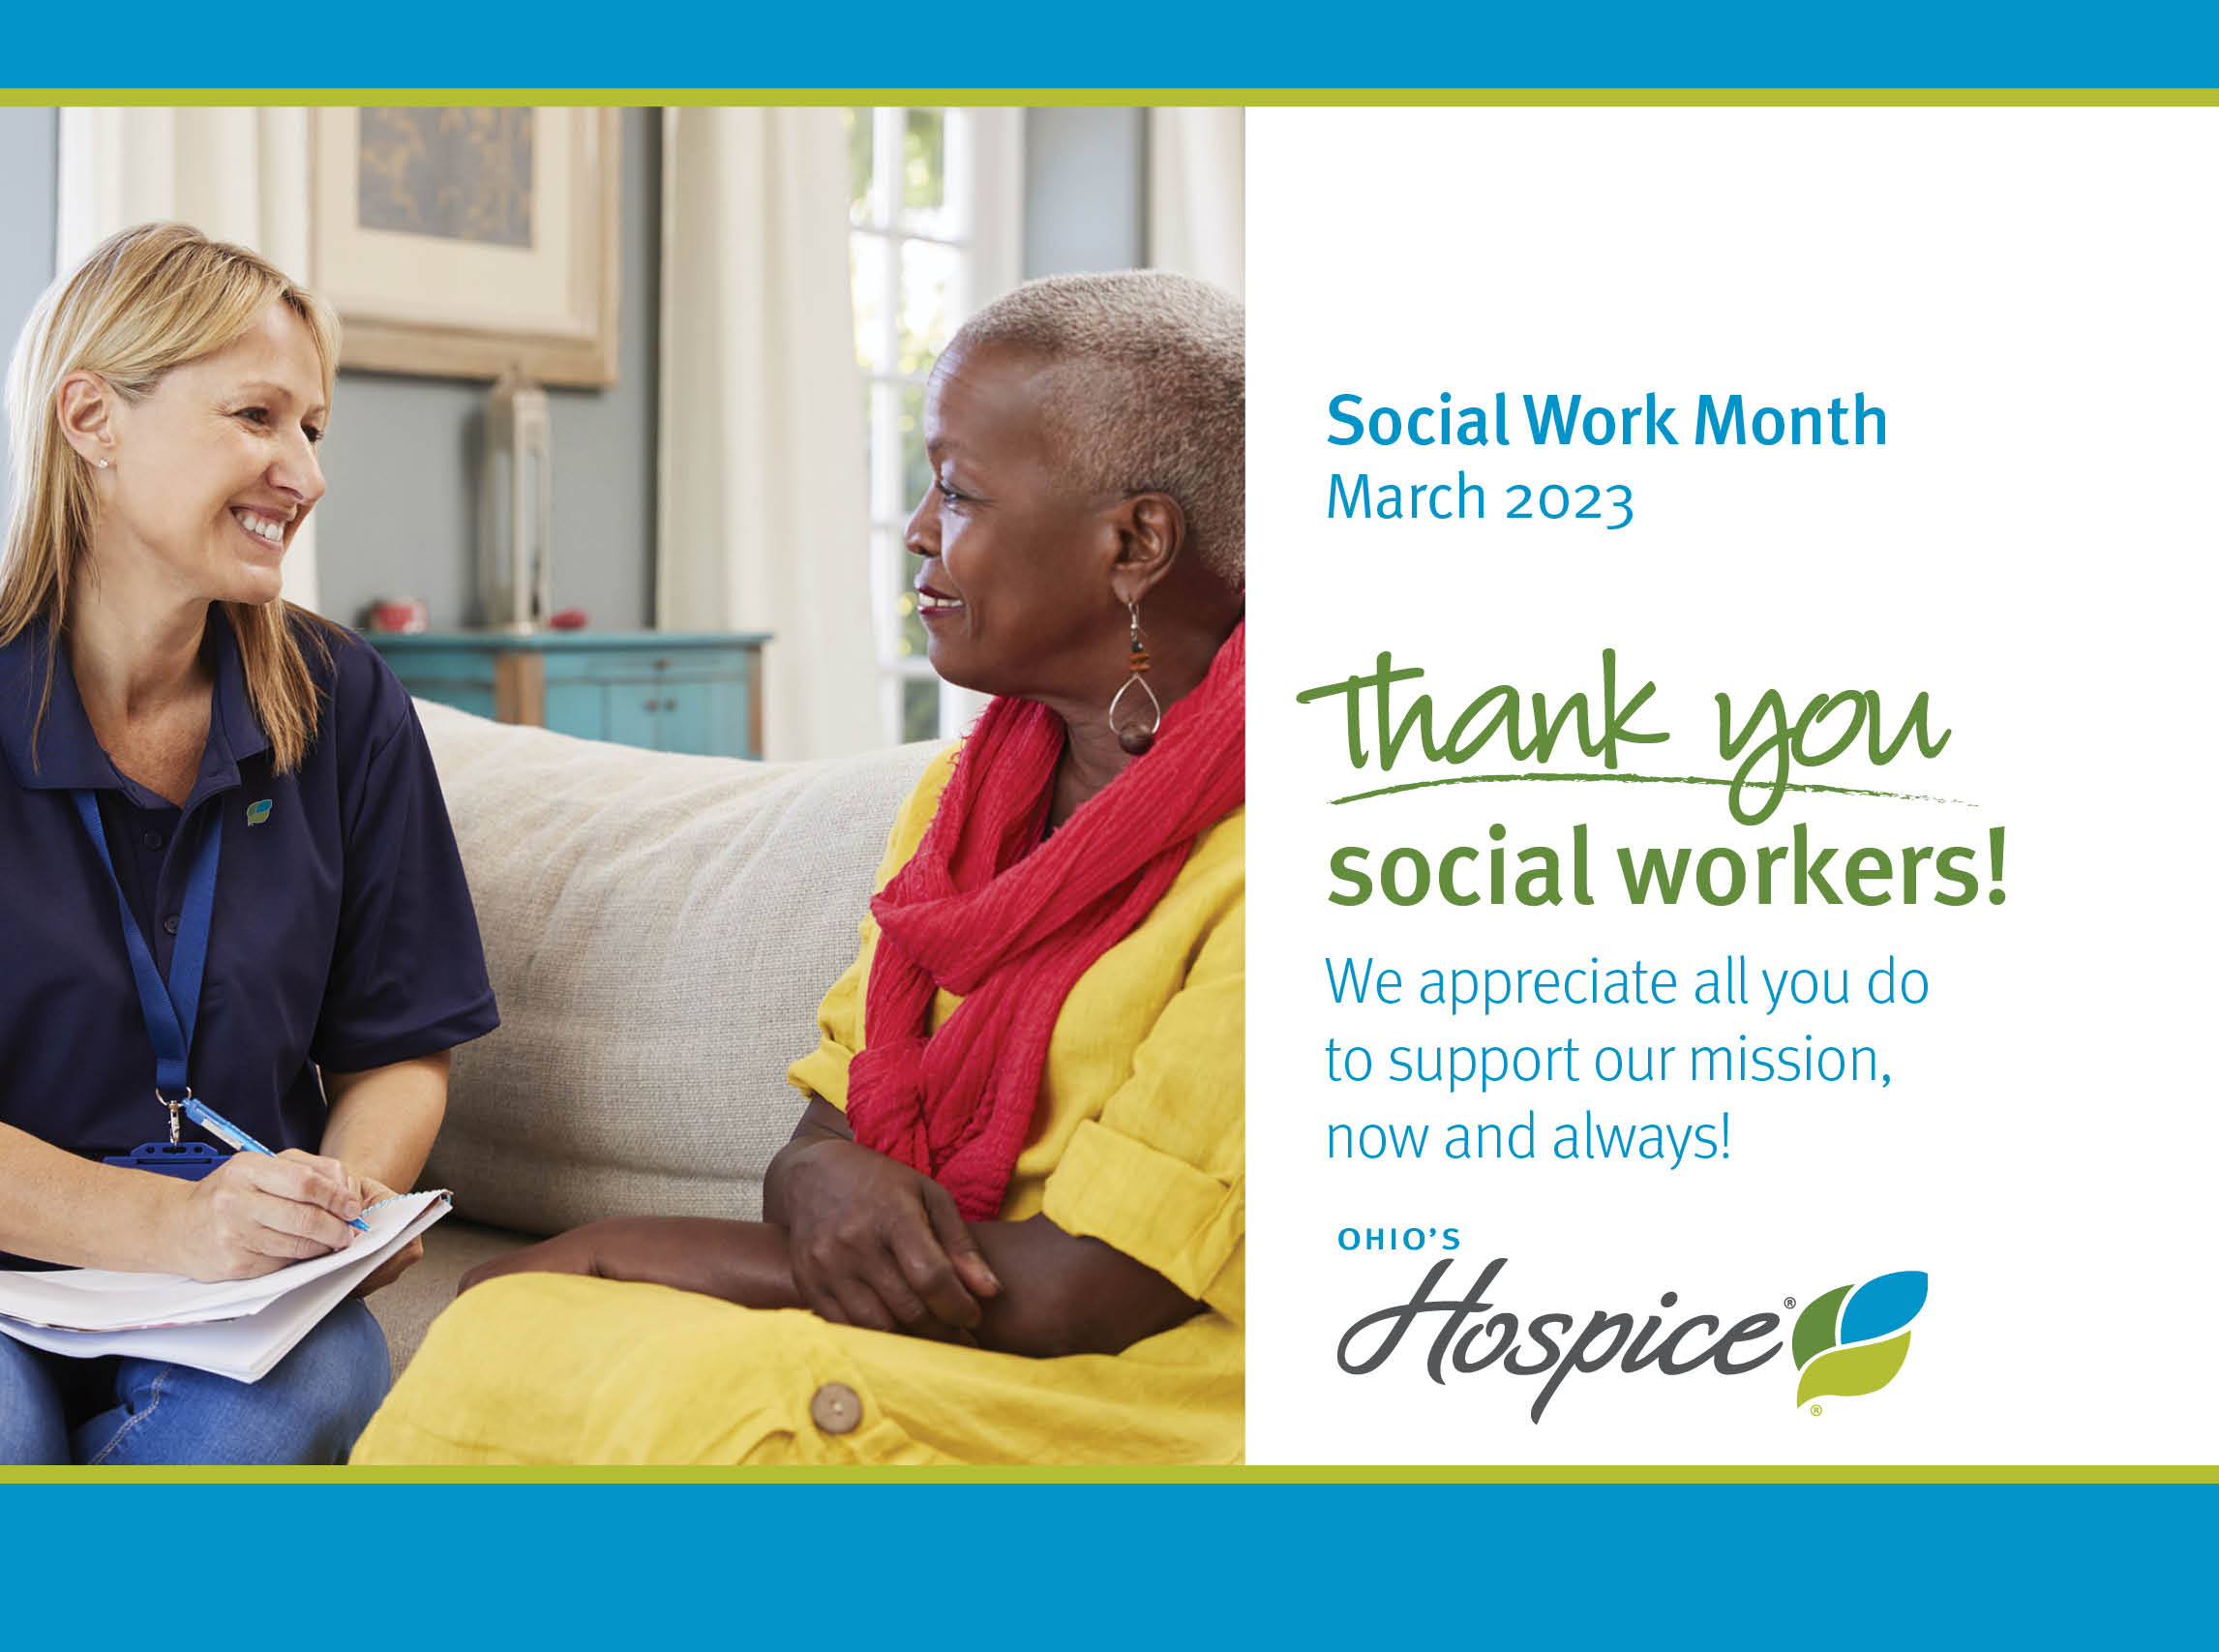 Social Work Month March 2023 Thank you social workers! We appreciate all you do to support our mission, now and always! Ohio's Hospice